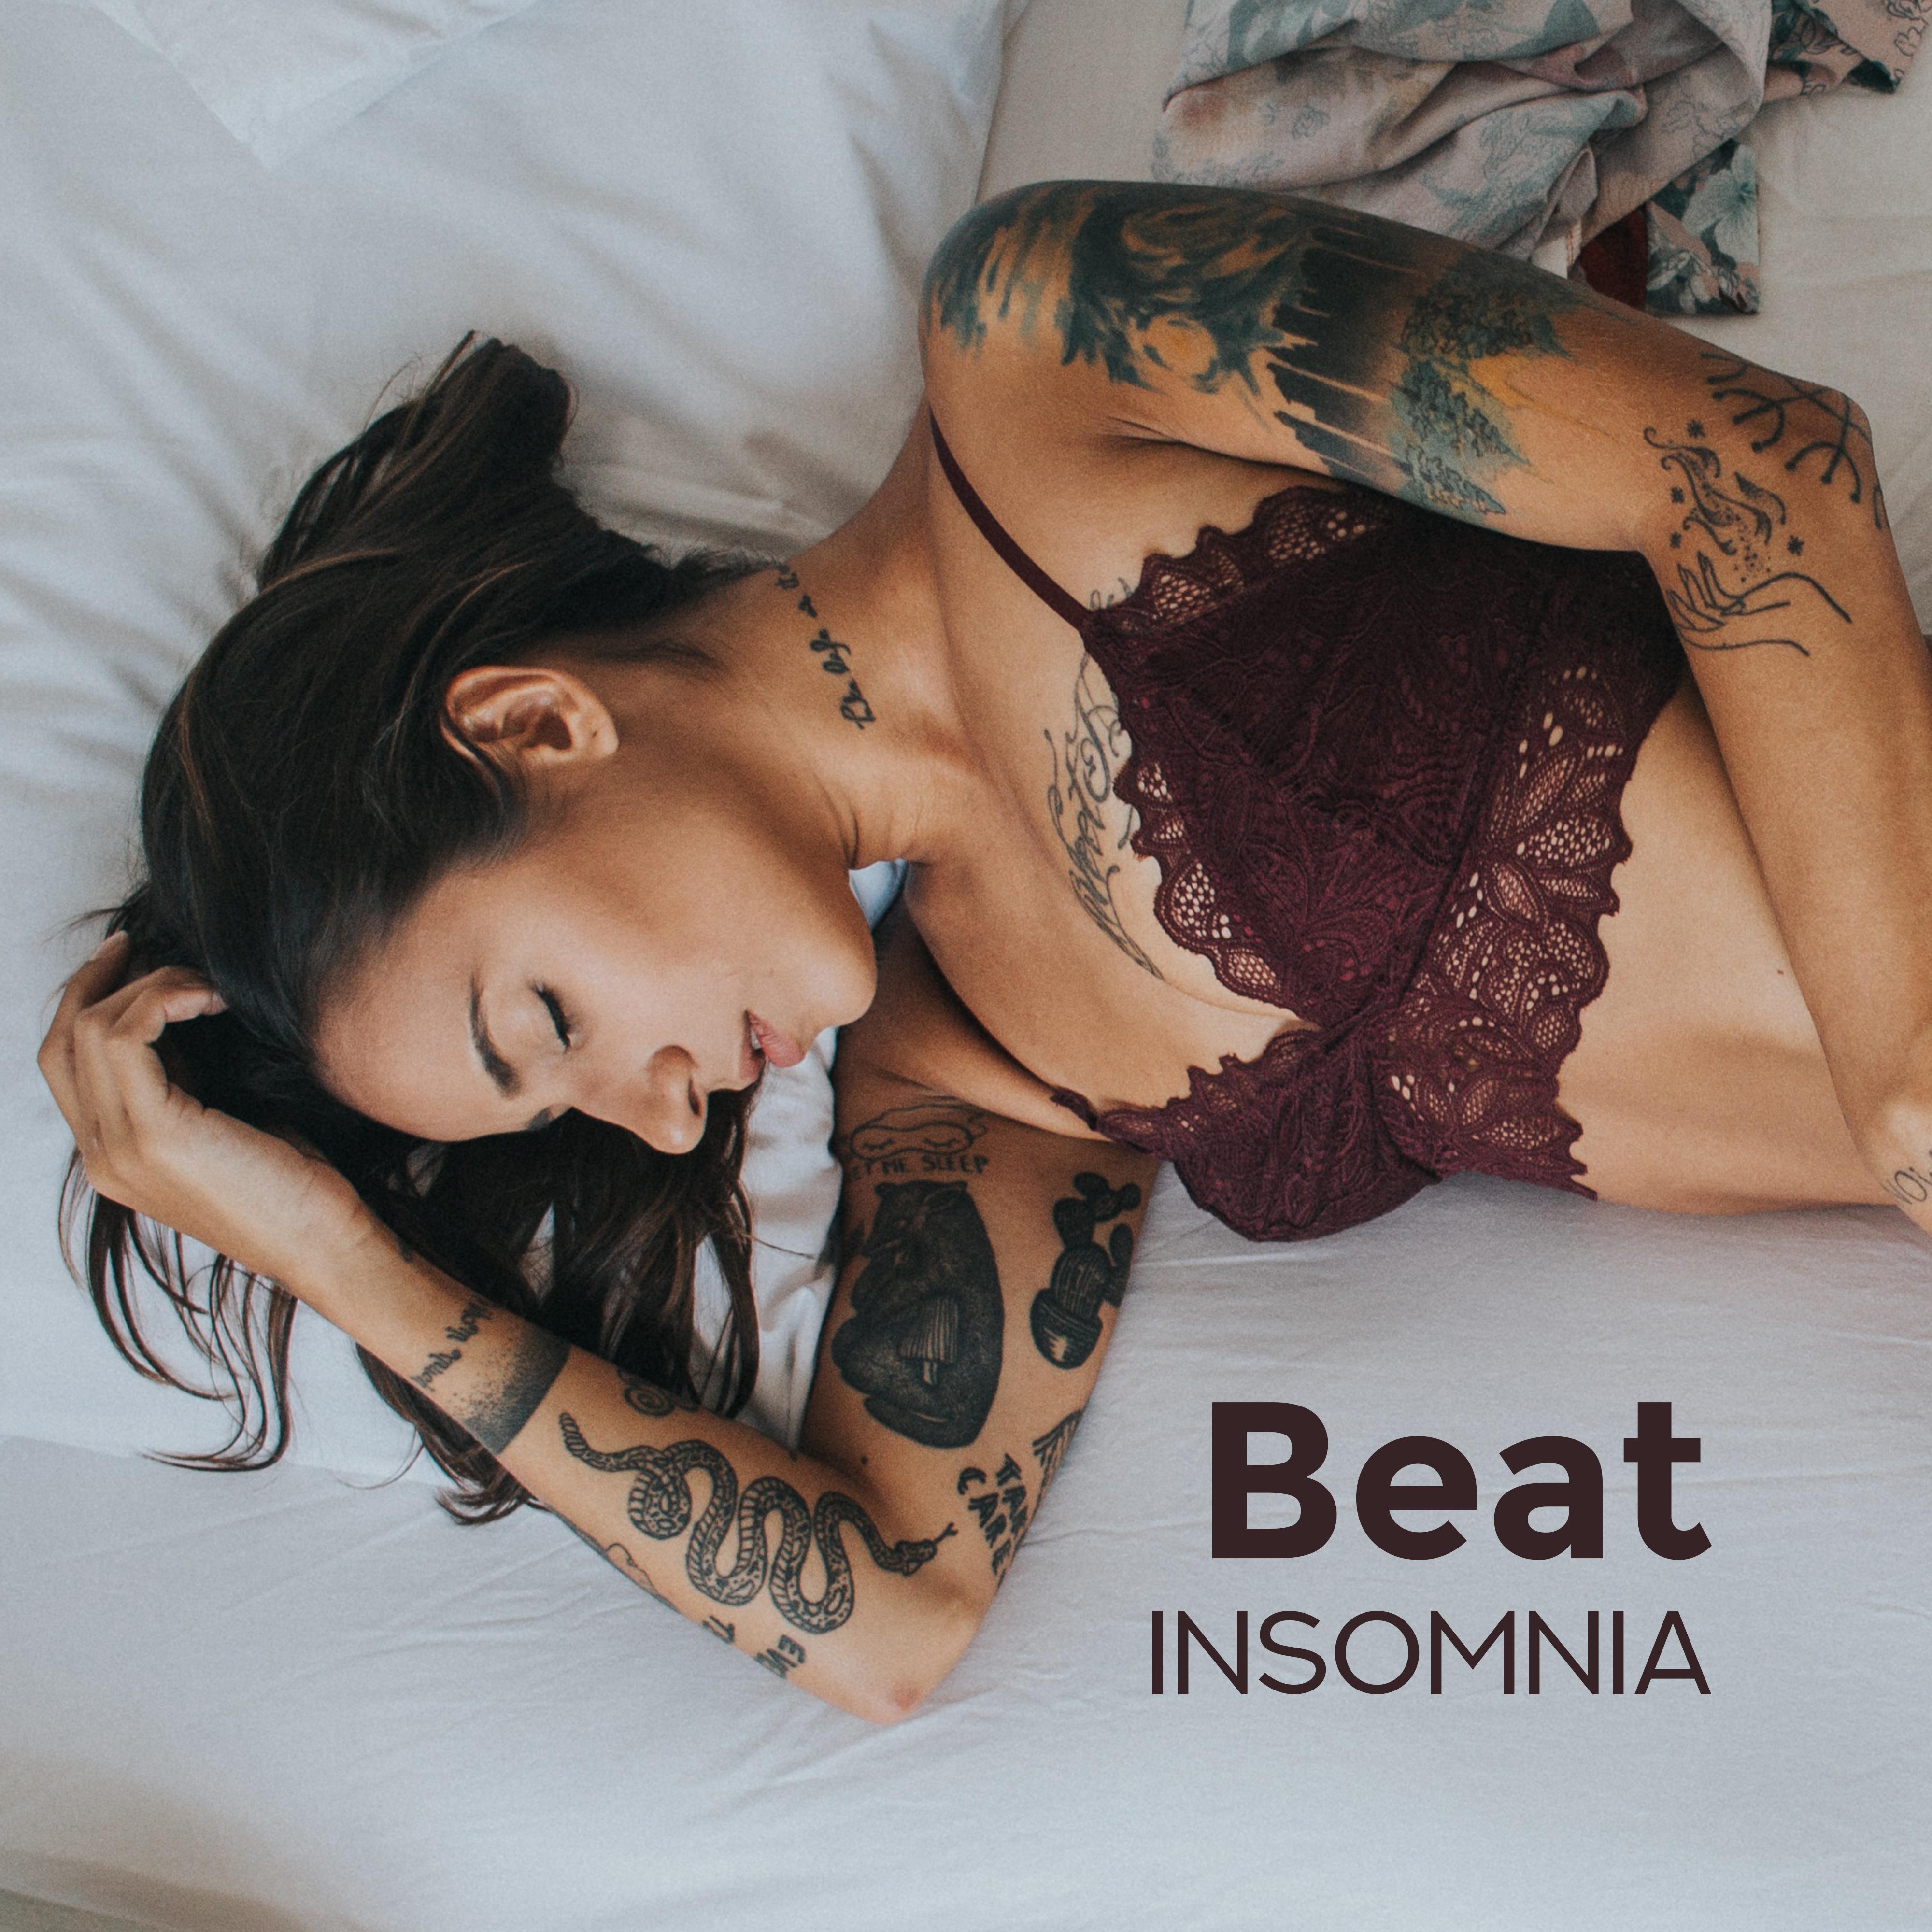 Beat Insomnia - Ambient Music Supporting the Process of Falling Asleep, Fighting Sleeplessness, Causes Drowsiness and Helps to Fall Asleep